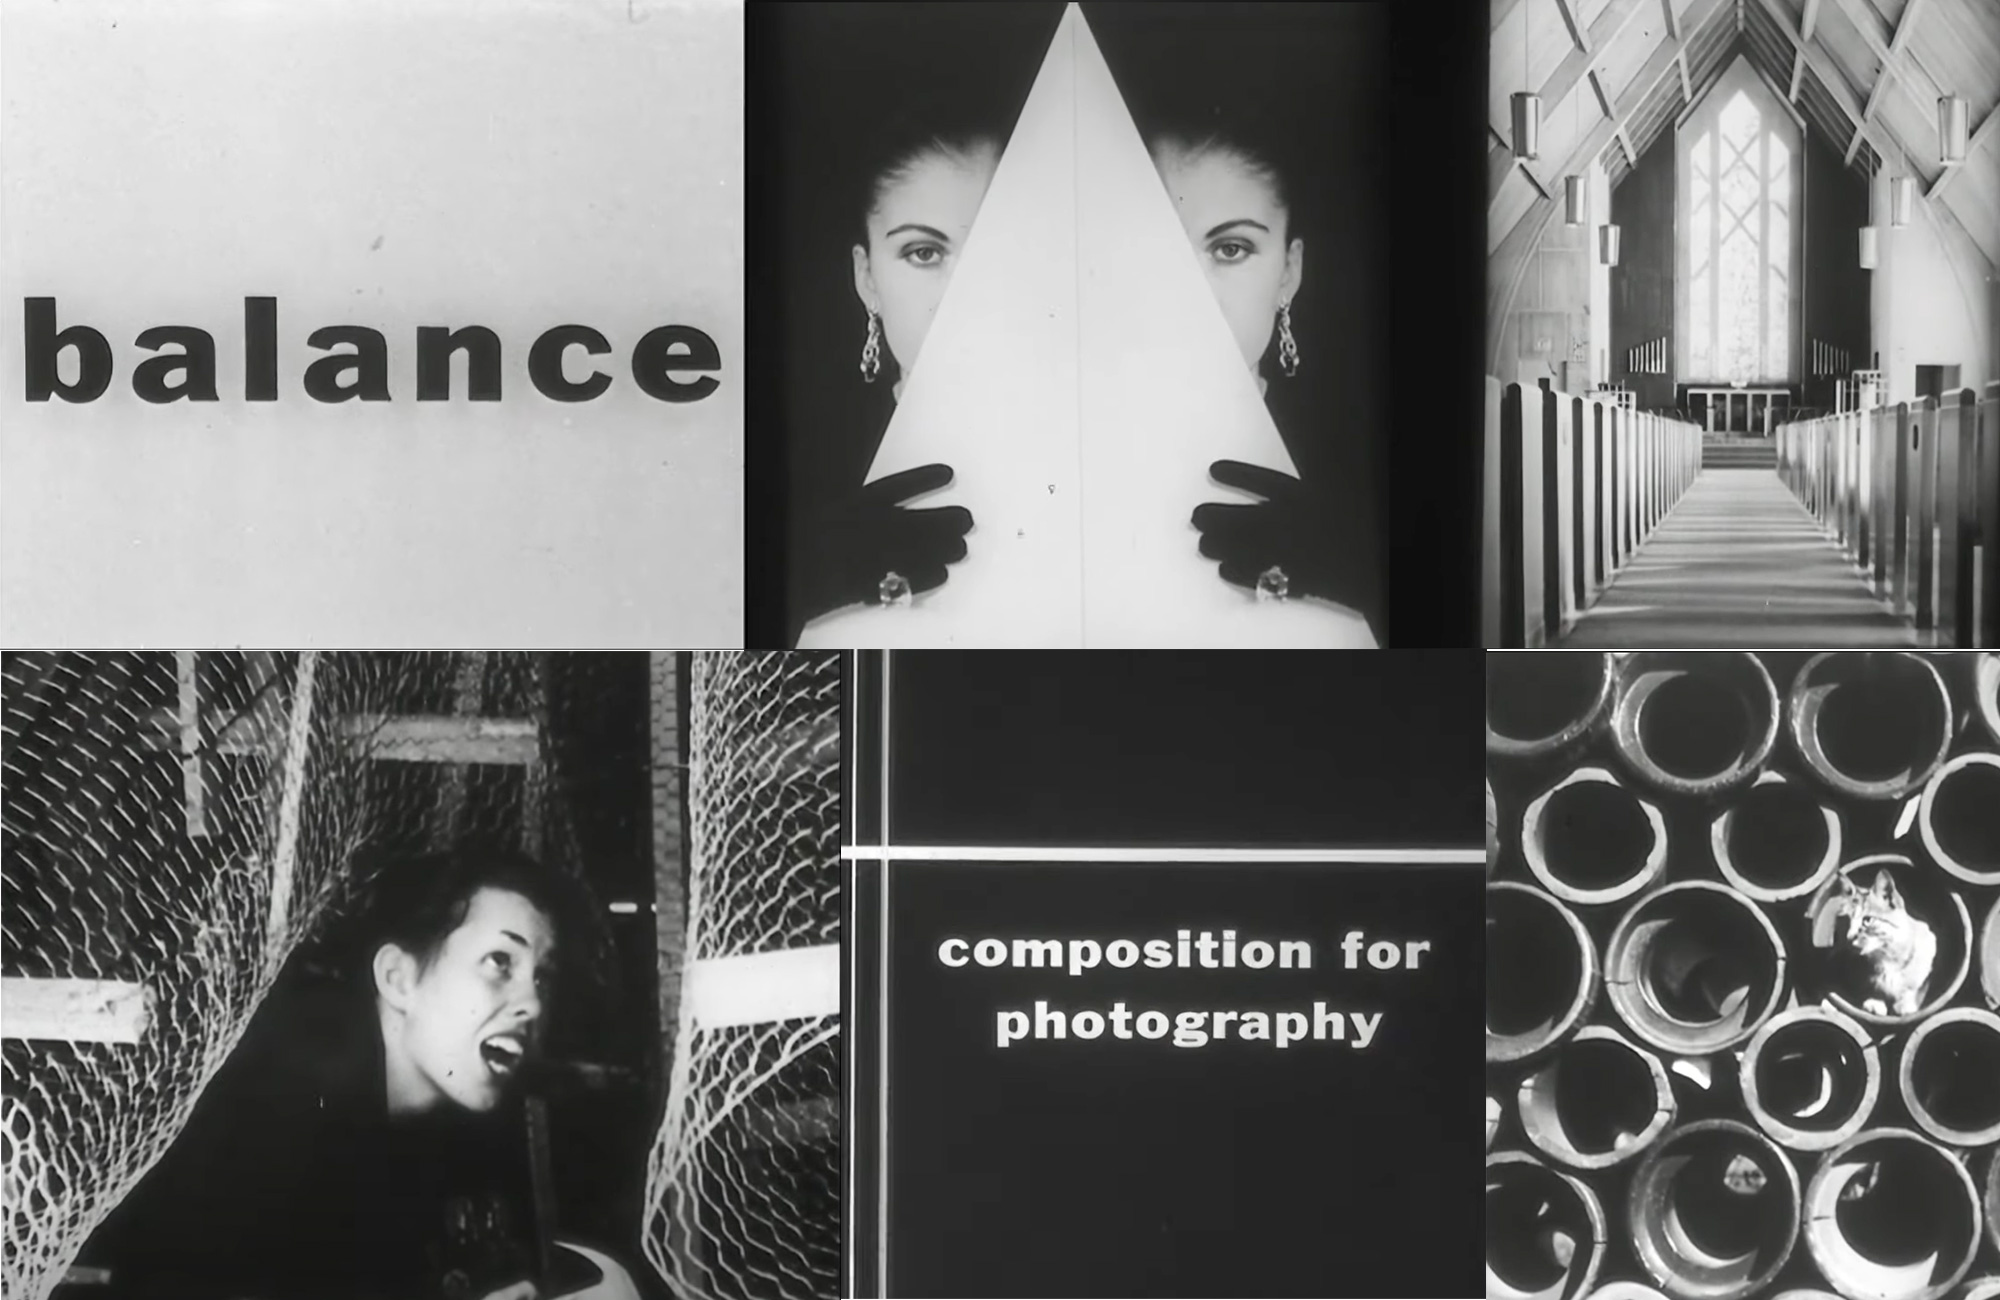 This video from 1949 offers offers photography composition tips everyone should know